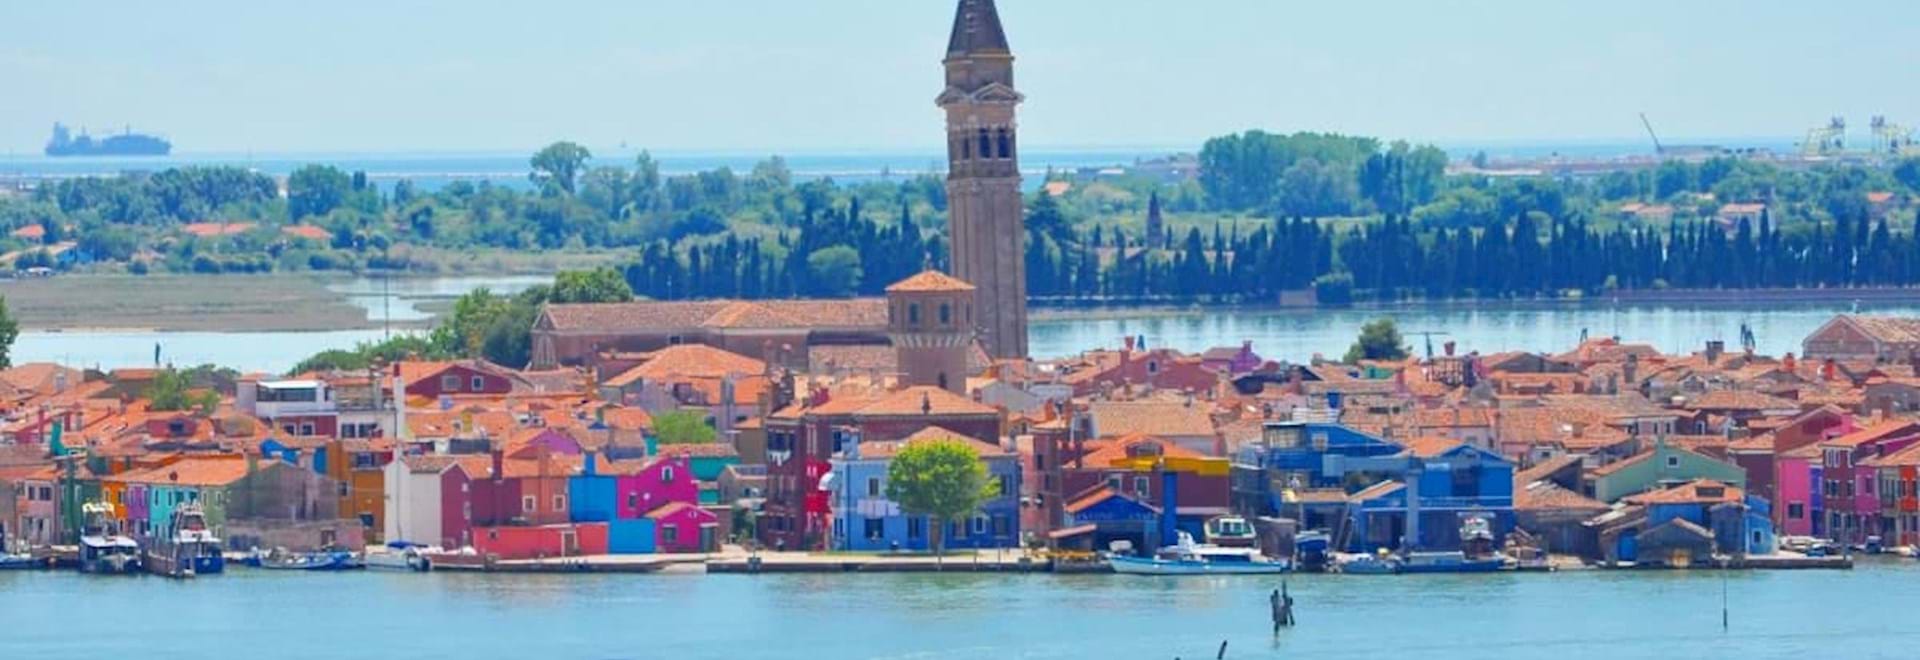 Beautiful view of torcello island